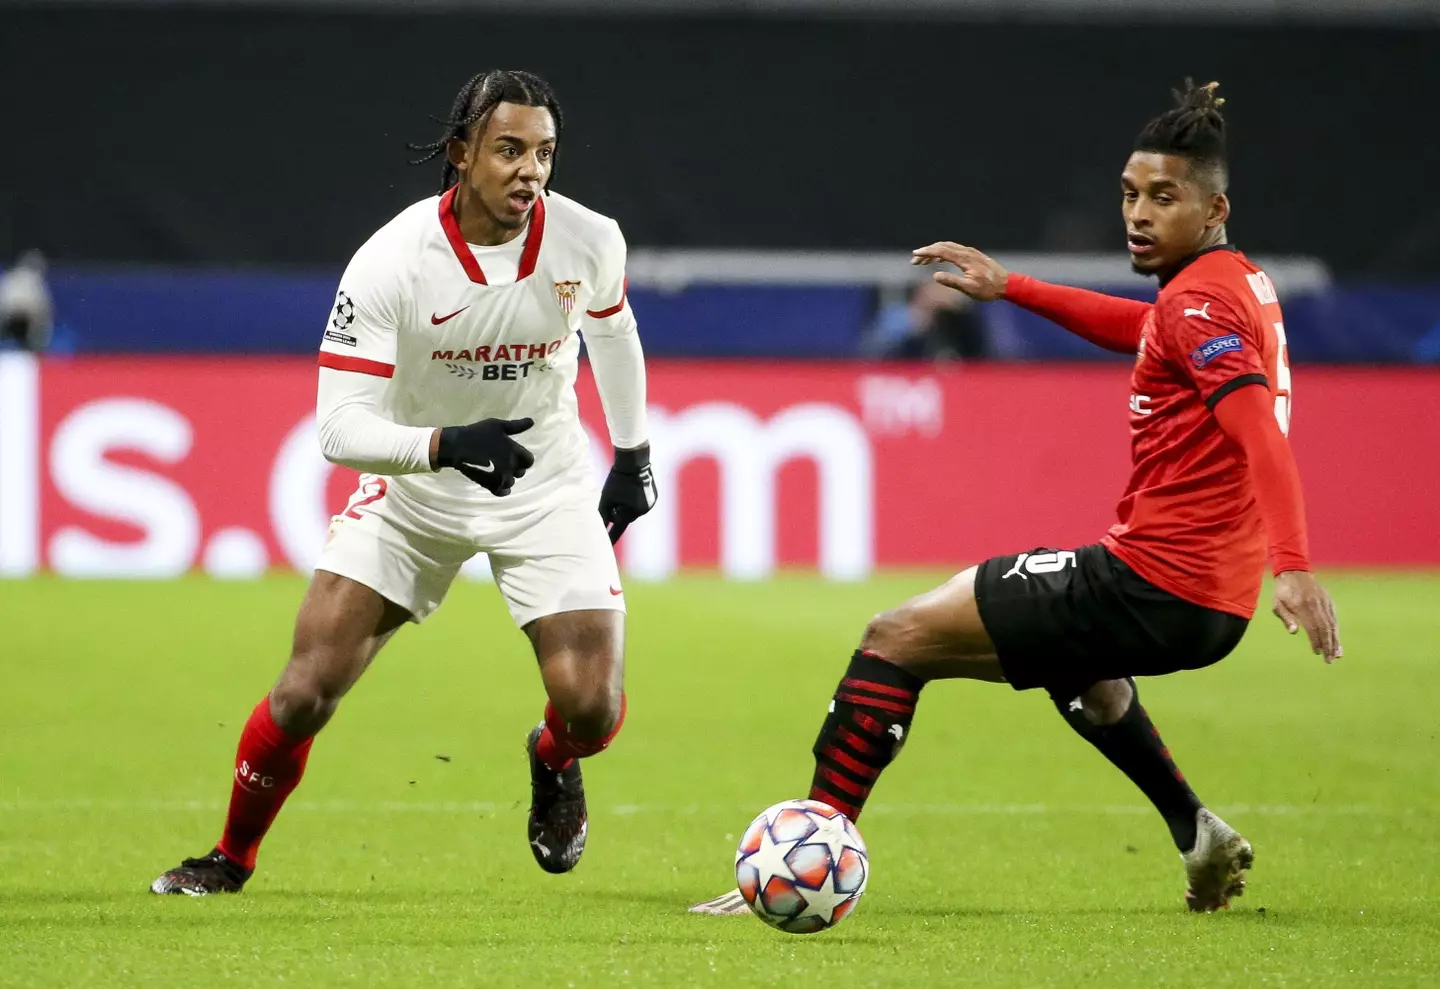 Chelsea could make another approach for Sevilla's Jules Kounde (Image: Alamy)